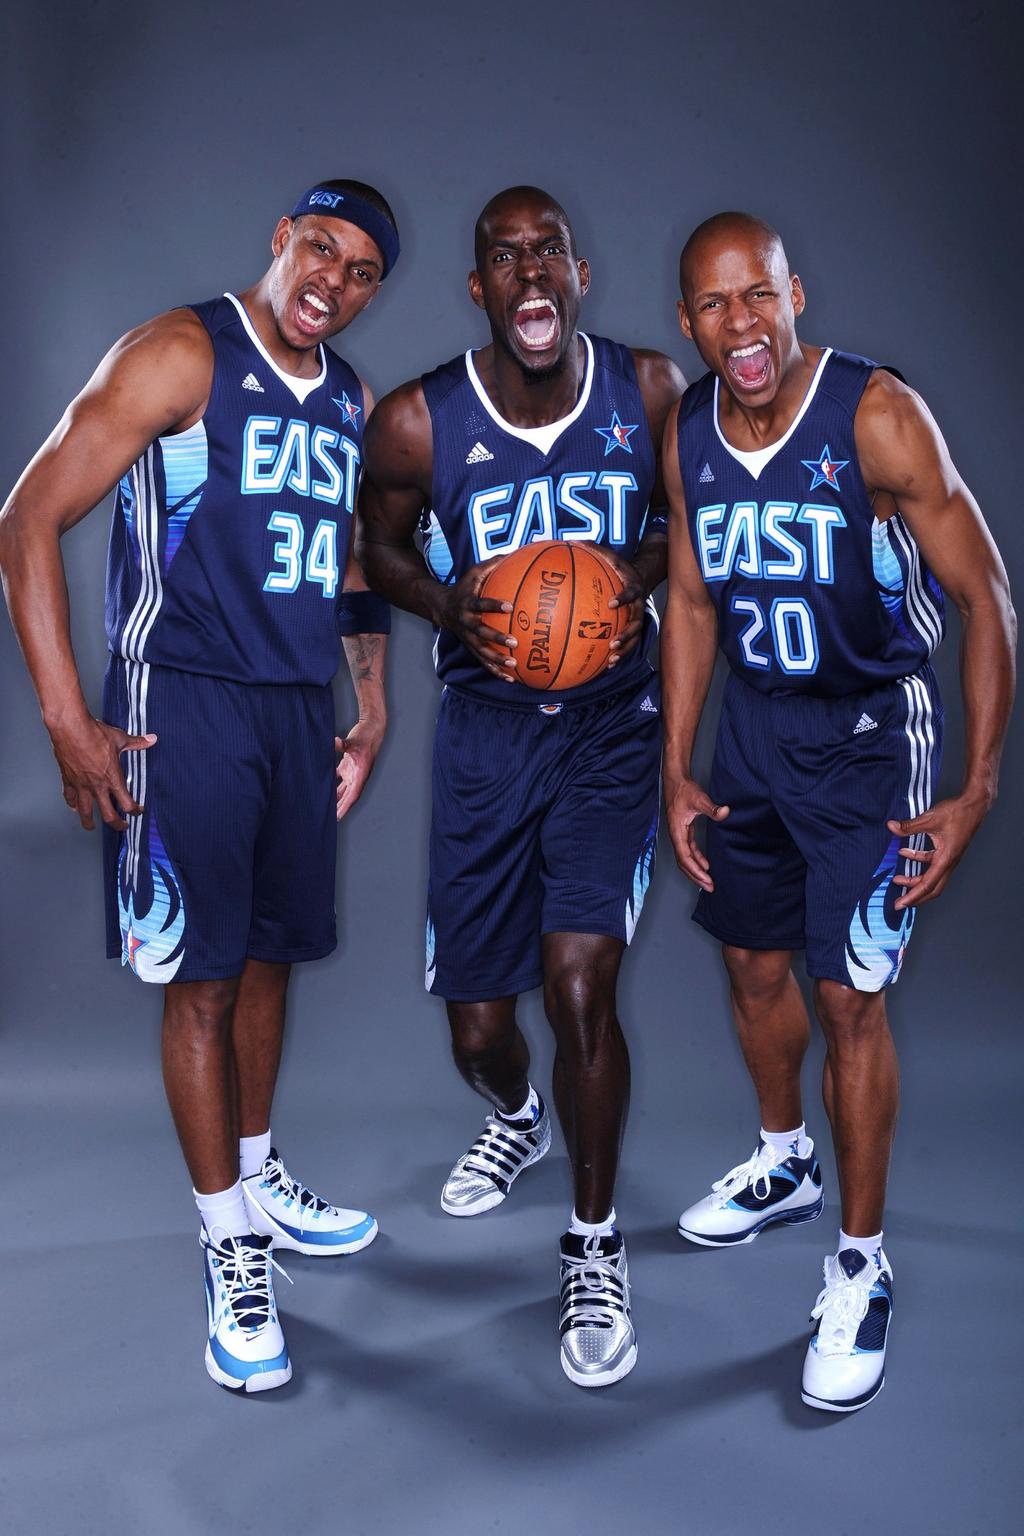 2009-nba-all-star-game-team  All star, Nba, Basketball team pictures